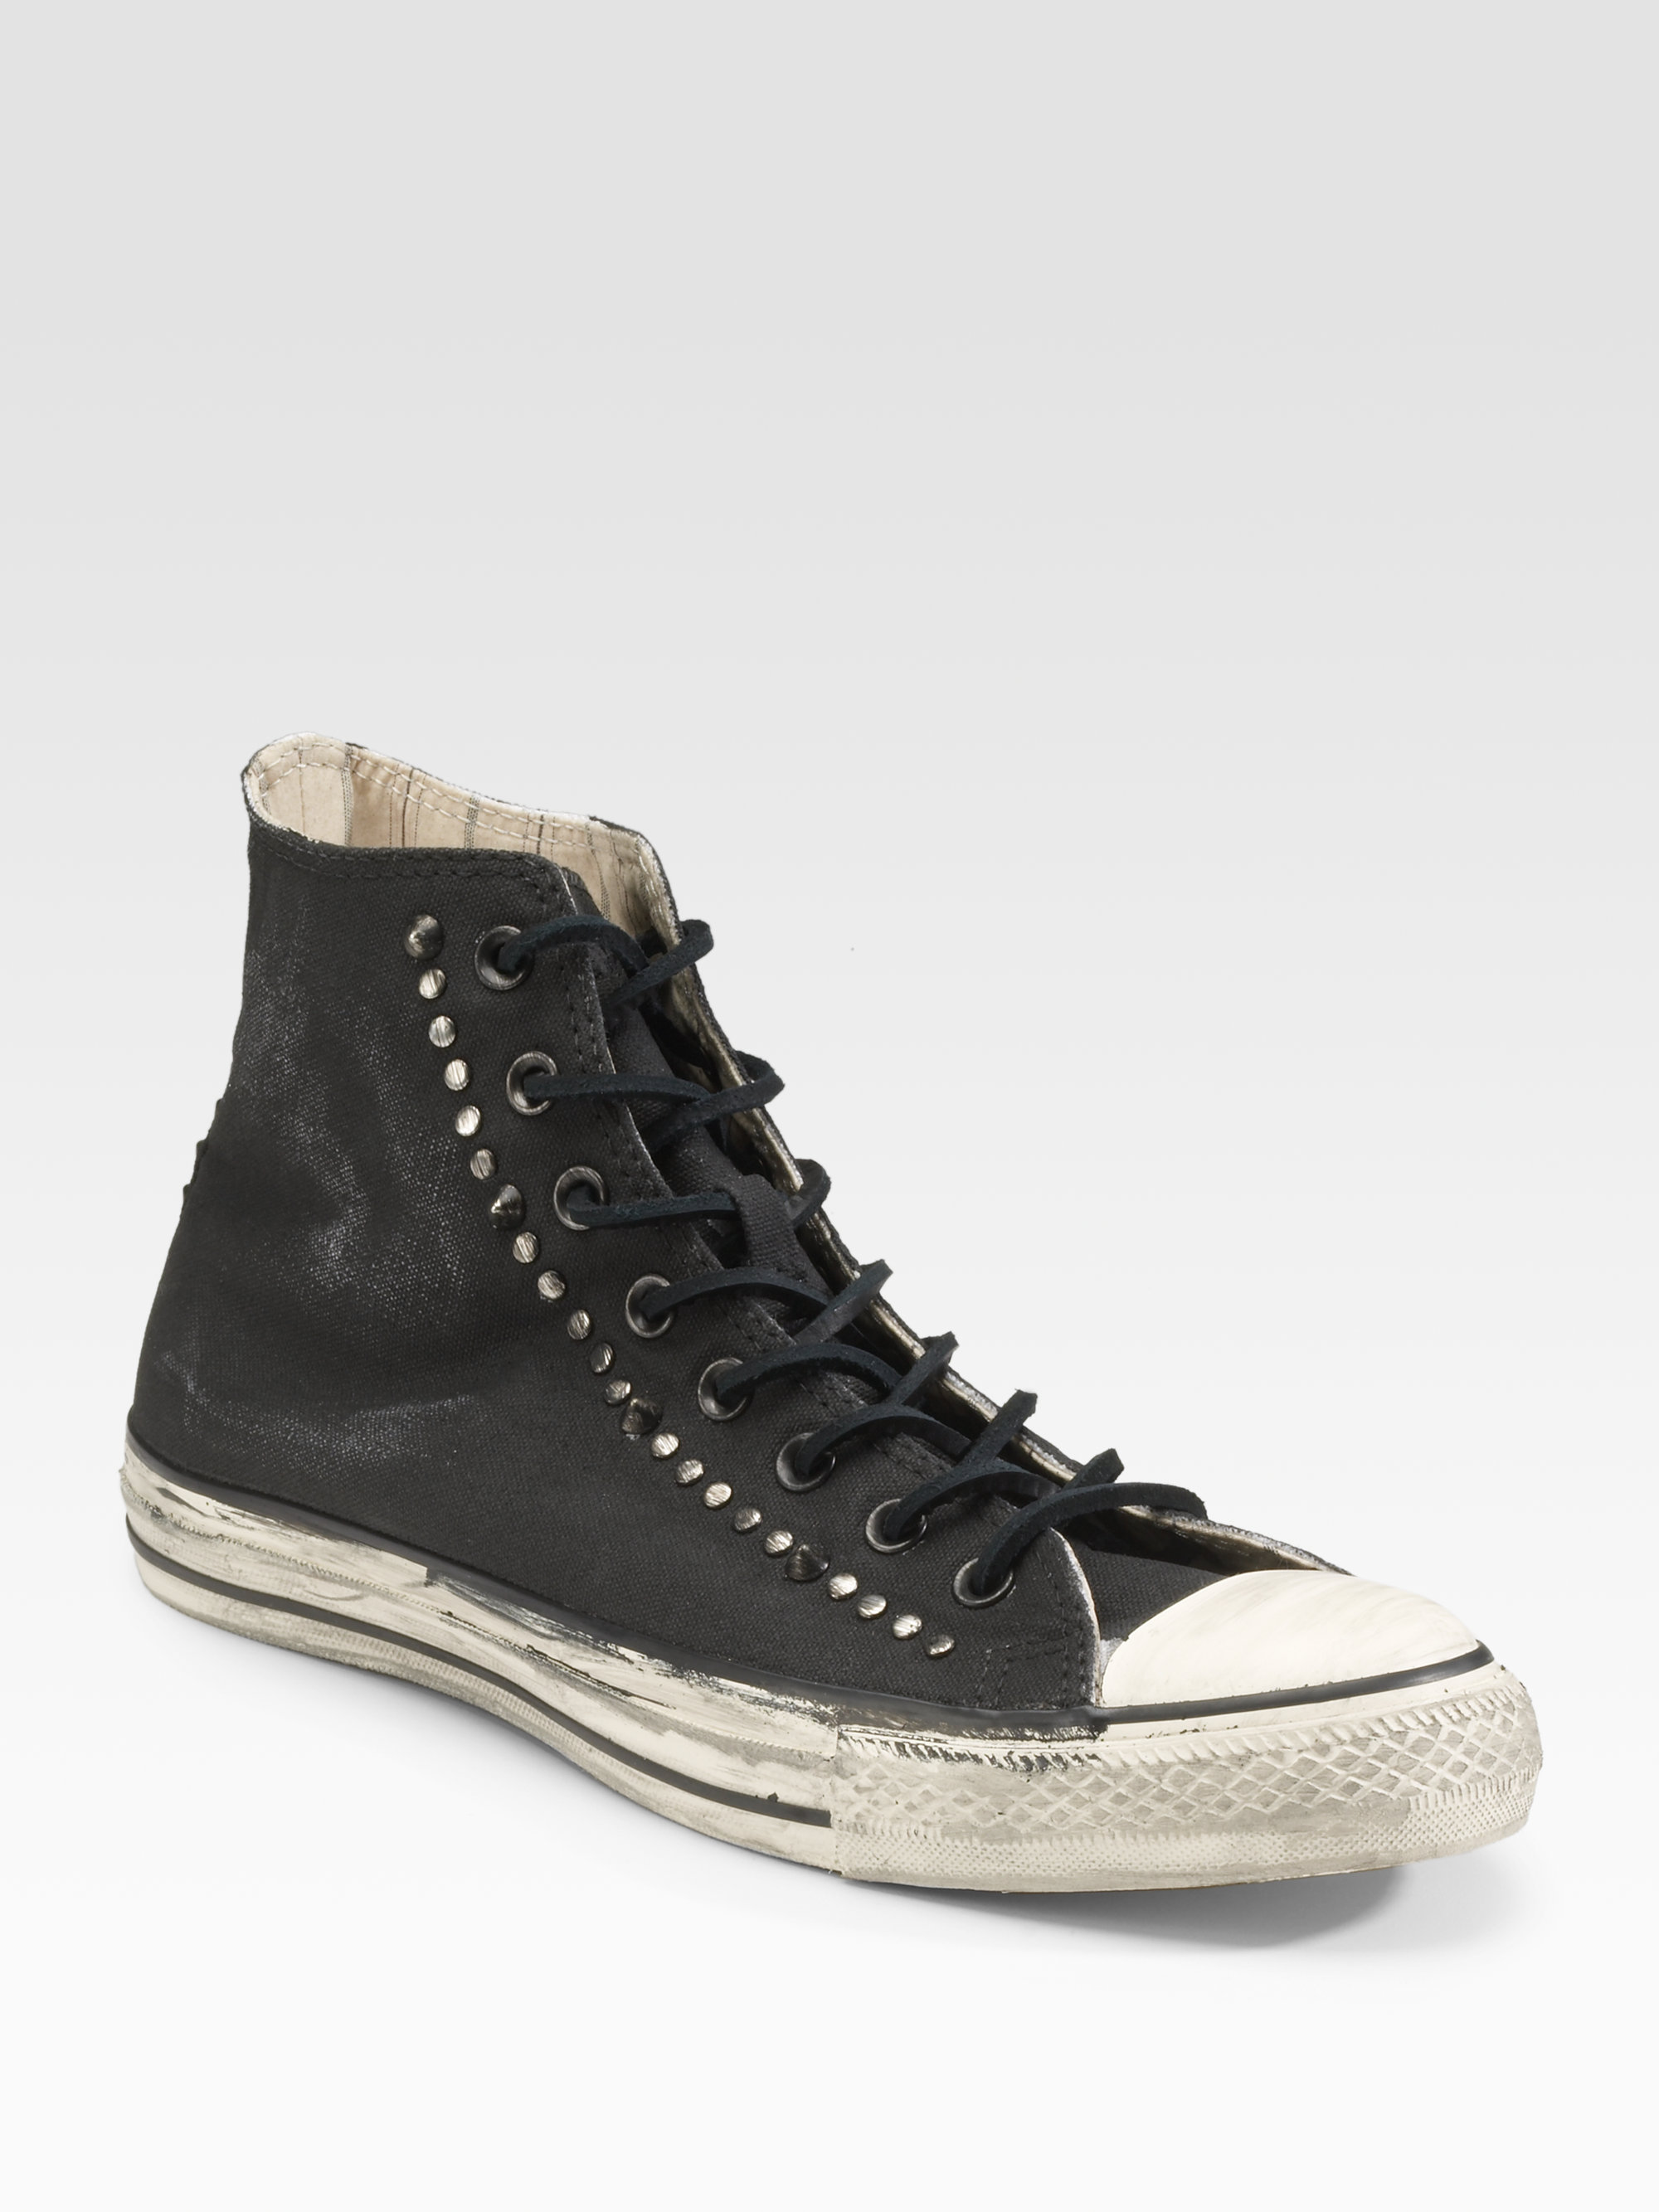 Converse Chuck Taylor Canvas Hightop Sneakers in Black for Men | Lyst